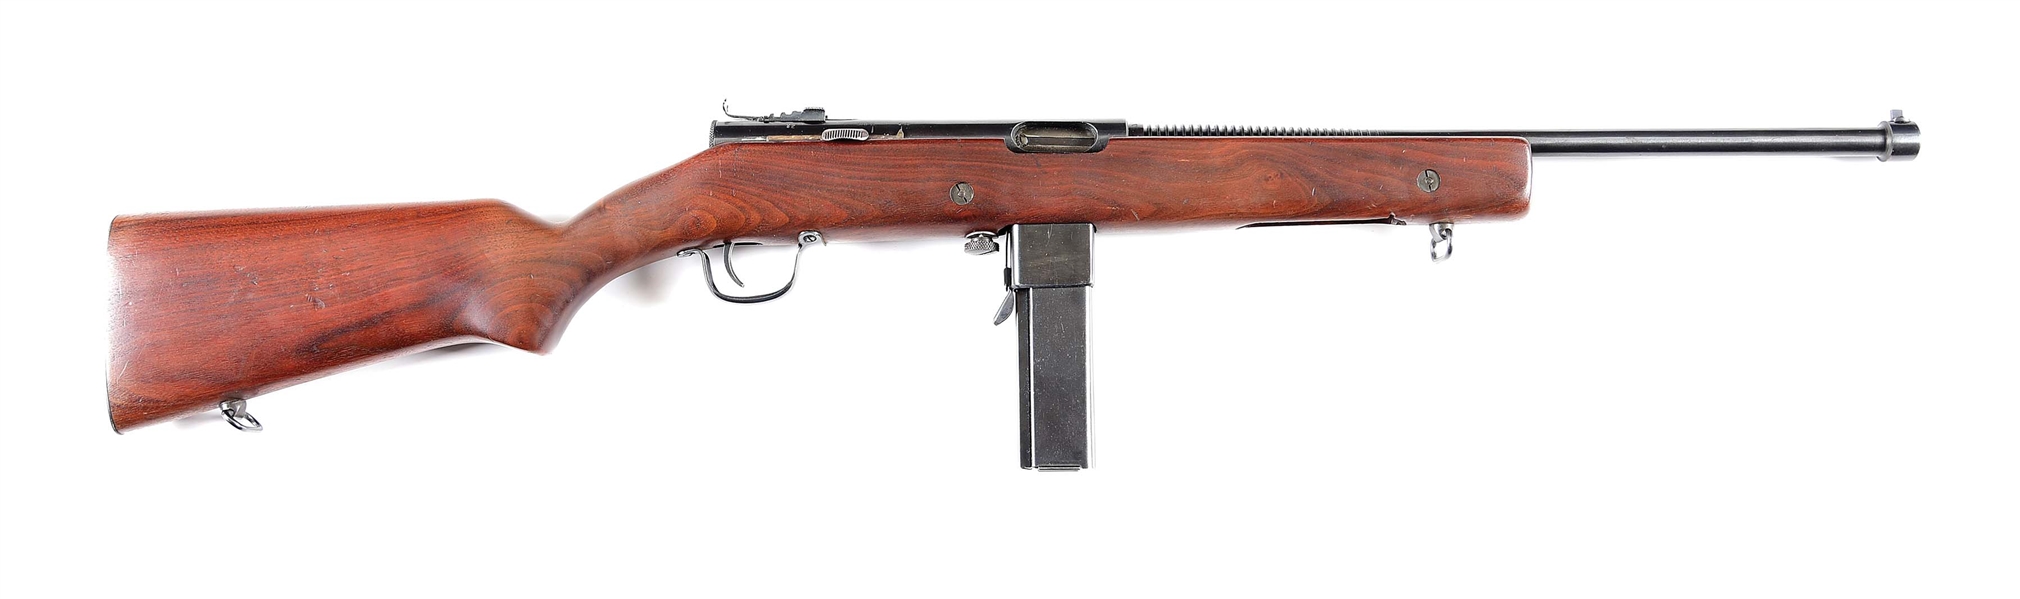 (C) TWO DIGIT SERIAL NUMBER H&R REISING MODEL 60 .45 ACP SEMI-AUTOMATIC RIFLE.